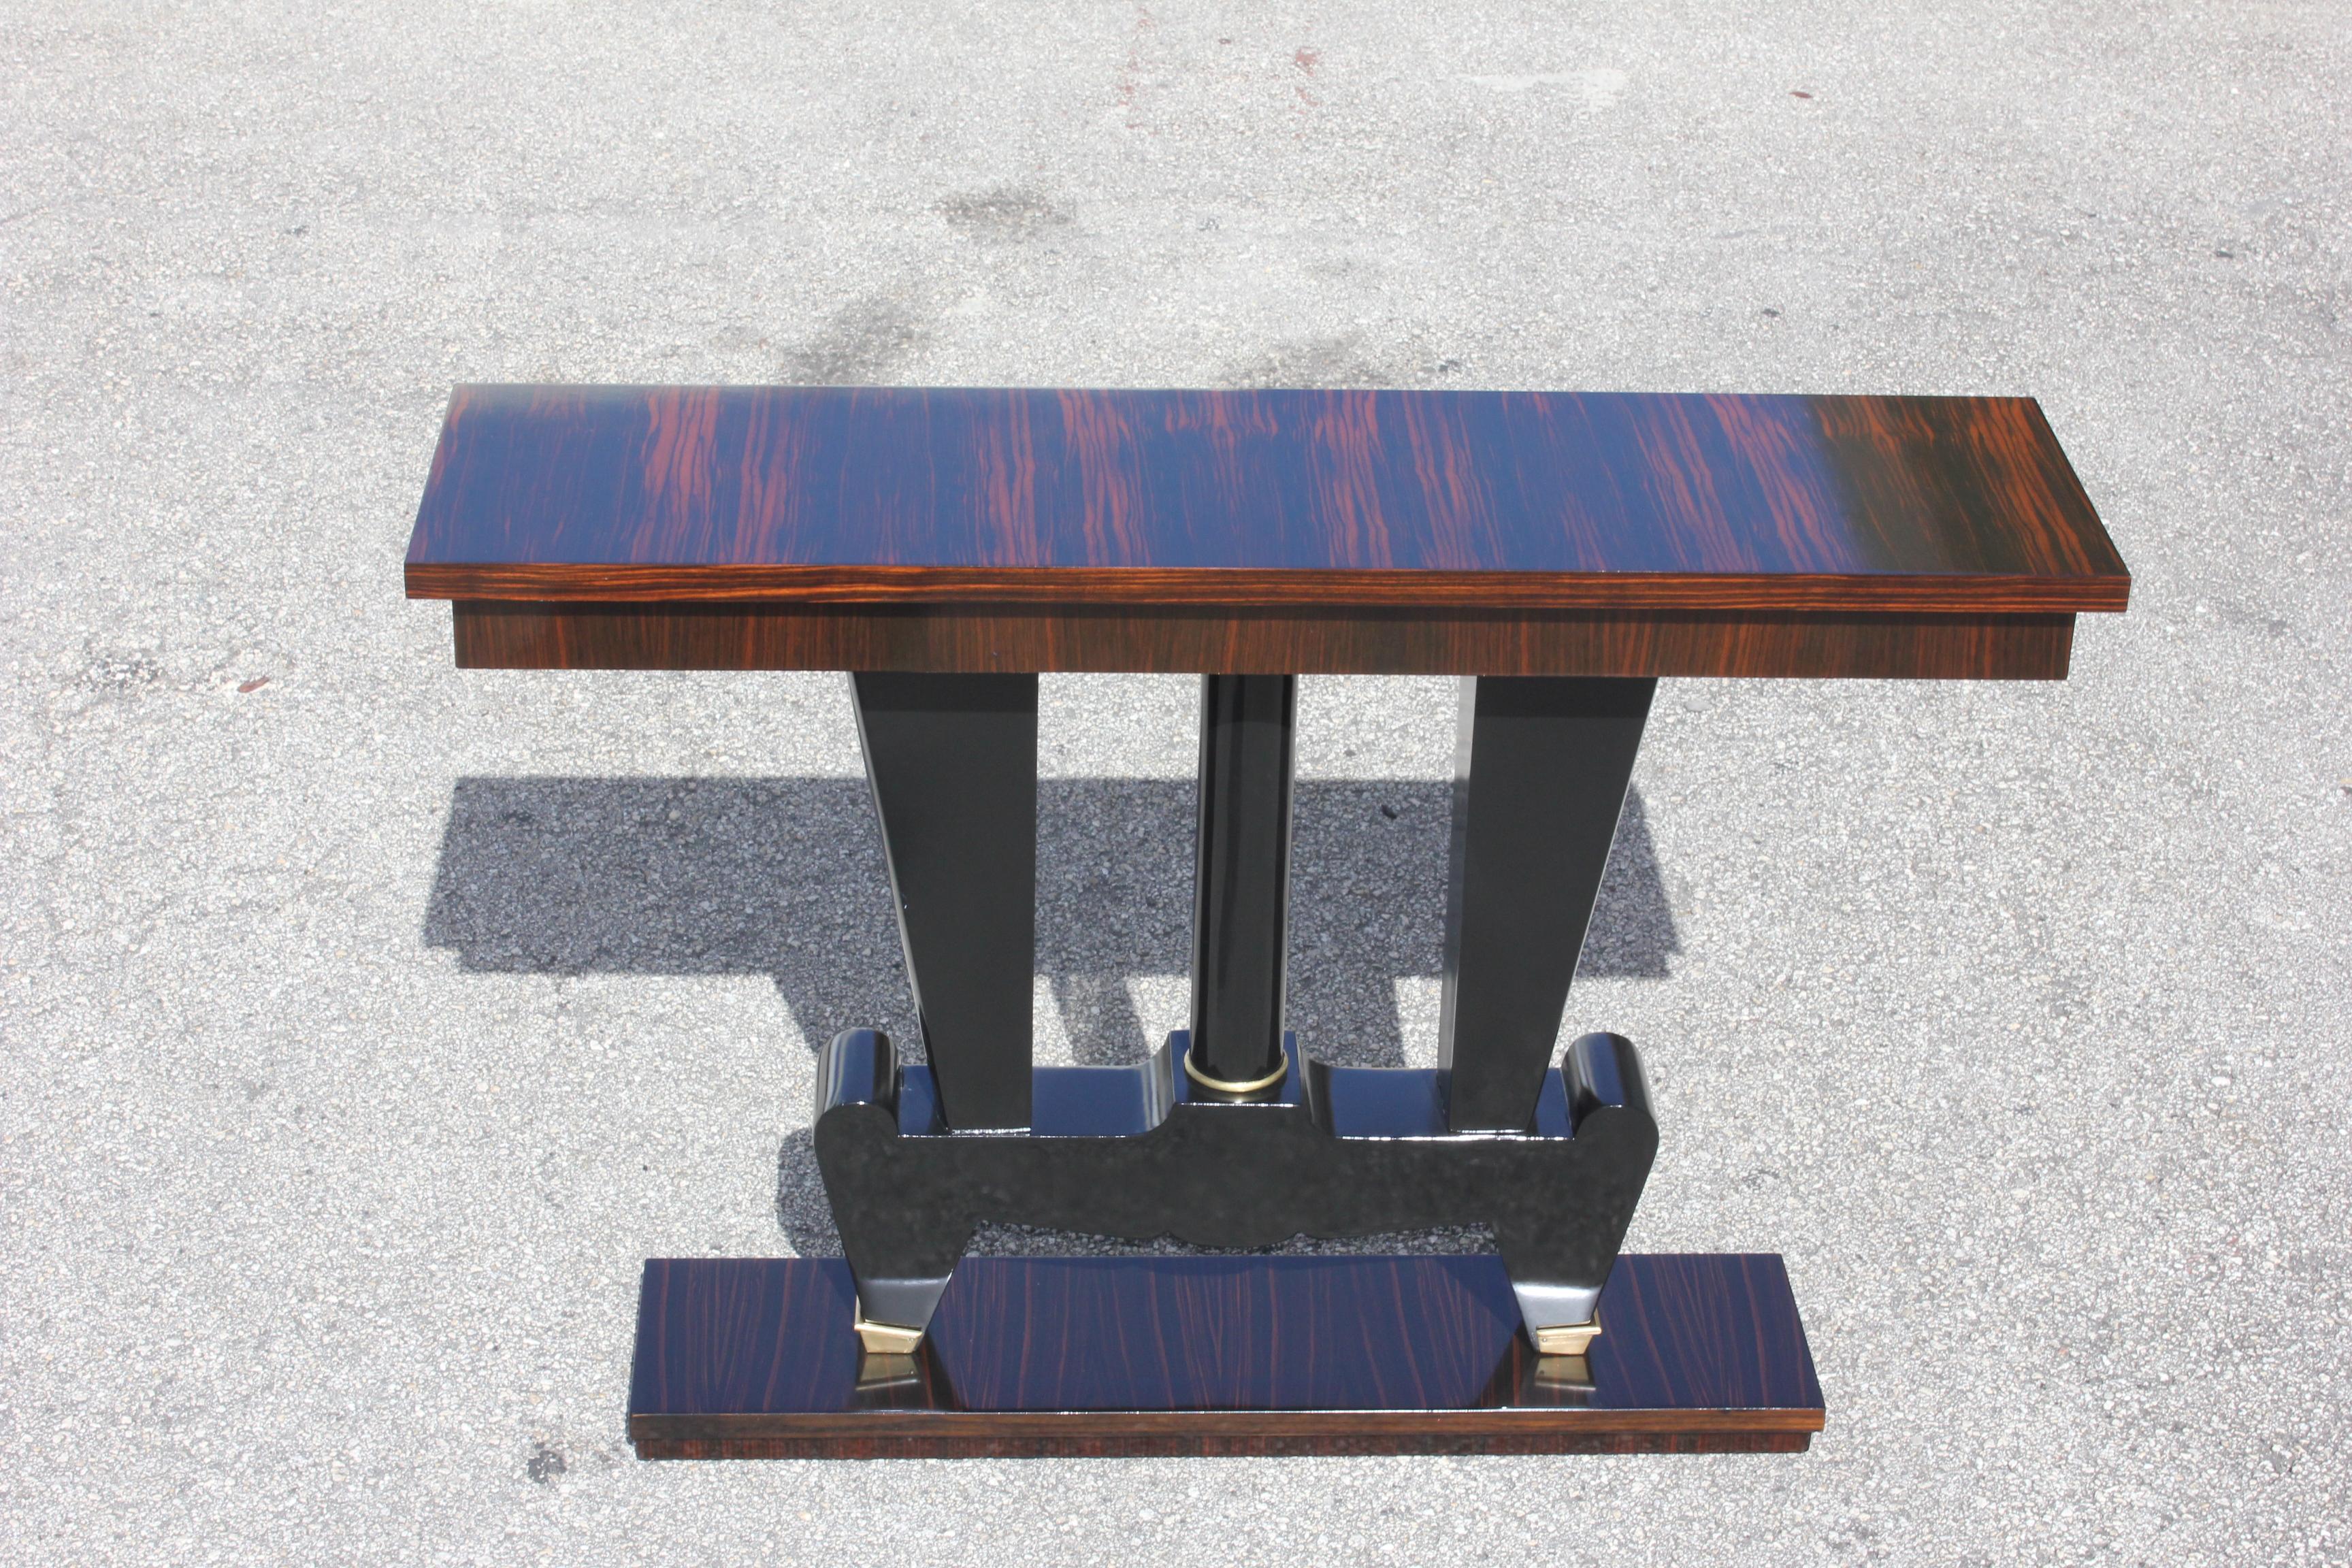 Unique French art deco exotic Macassar ebony console tables, circa 1940s. Beautiful Macassar ebony with black lacquer base, high gloss lacquer finish in both side, beautiful bronze hardware detail, that rest on makes it ideal for use as a bedside